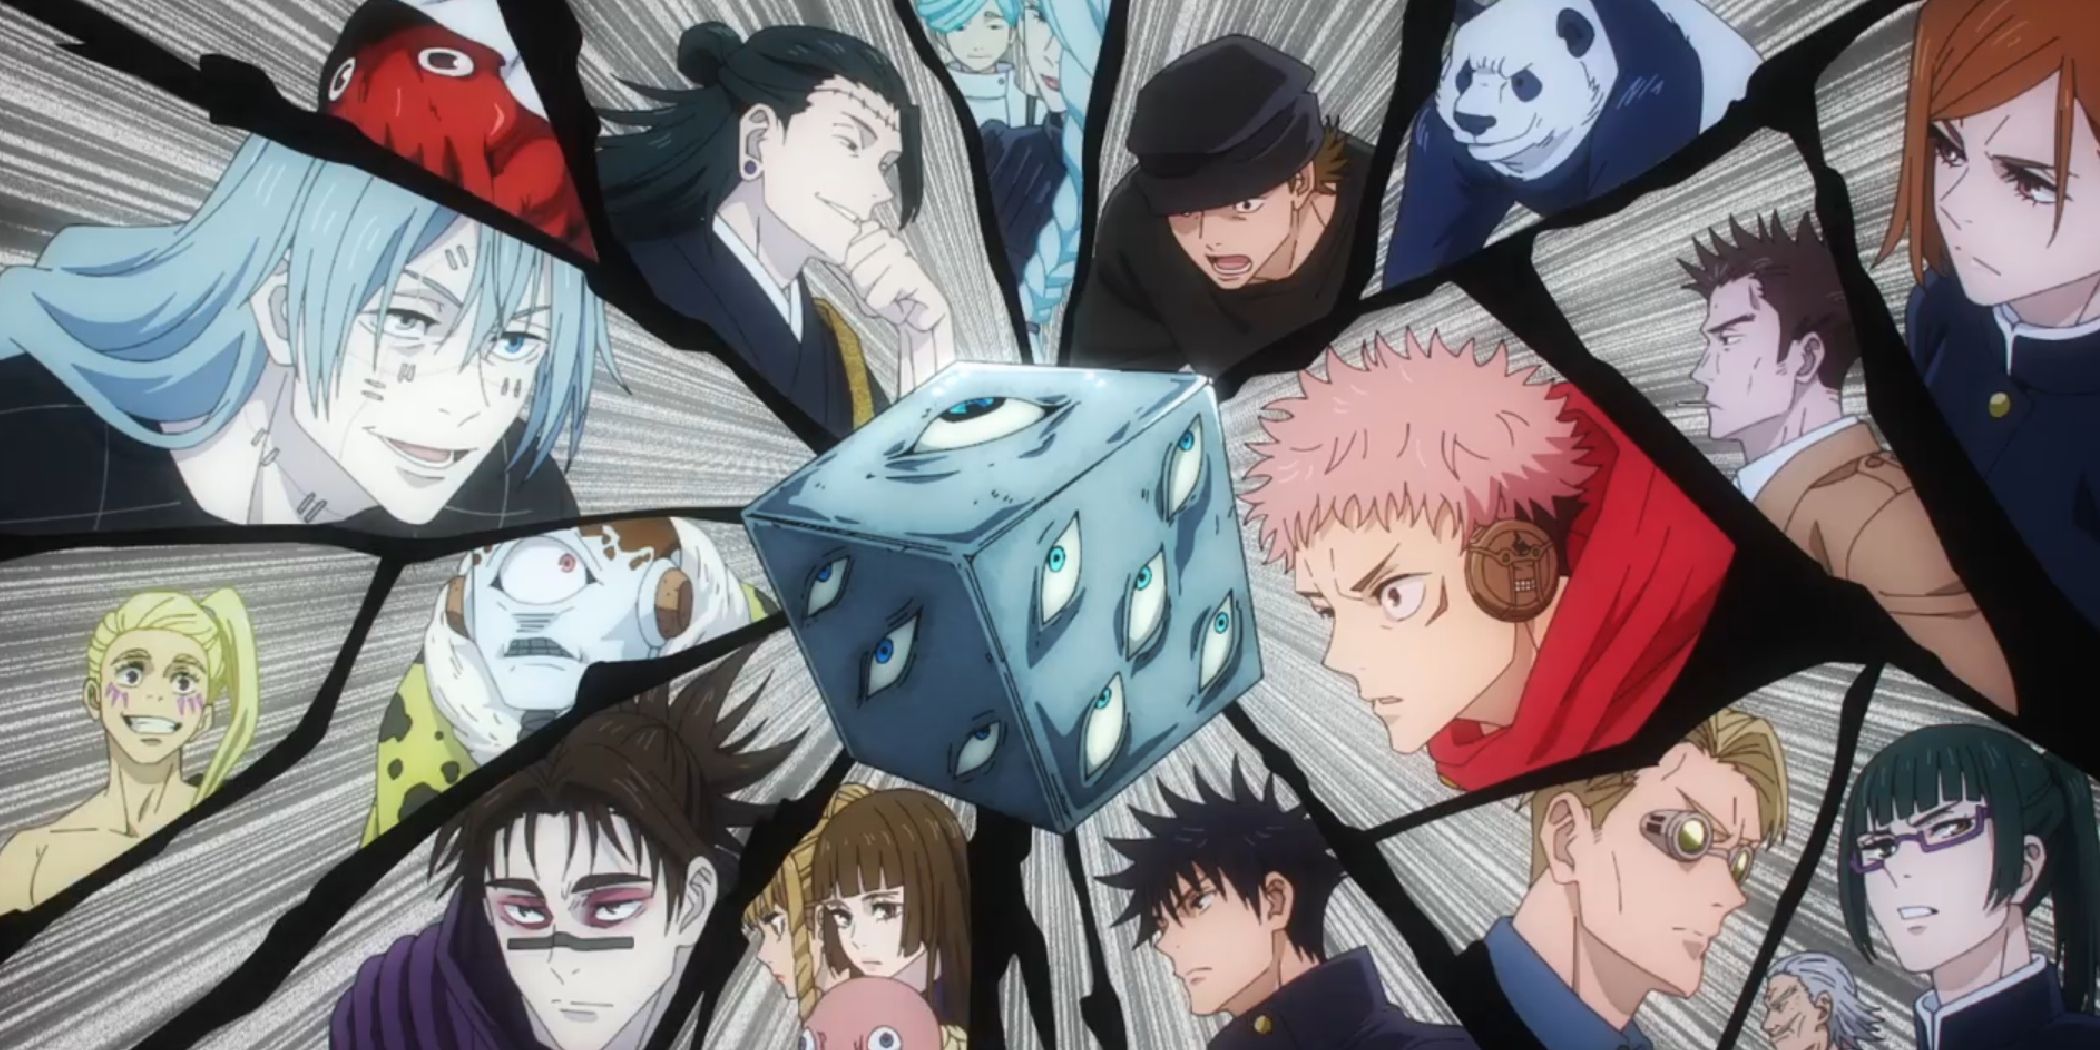 Jujutsu Kaisen Shibuya Incident Arc action sequence featuring every major character featured in the arc.